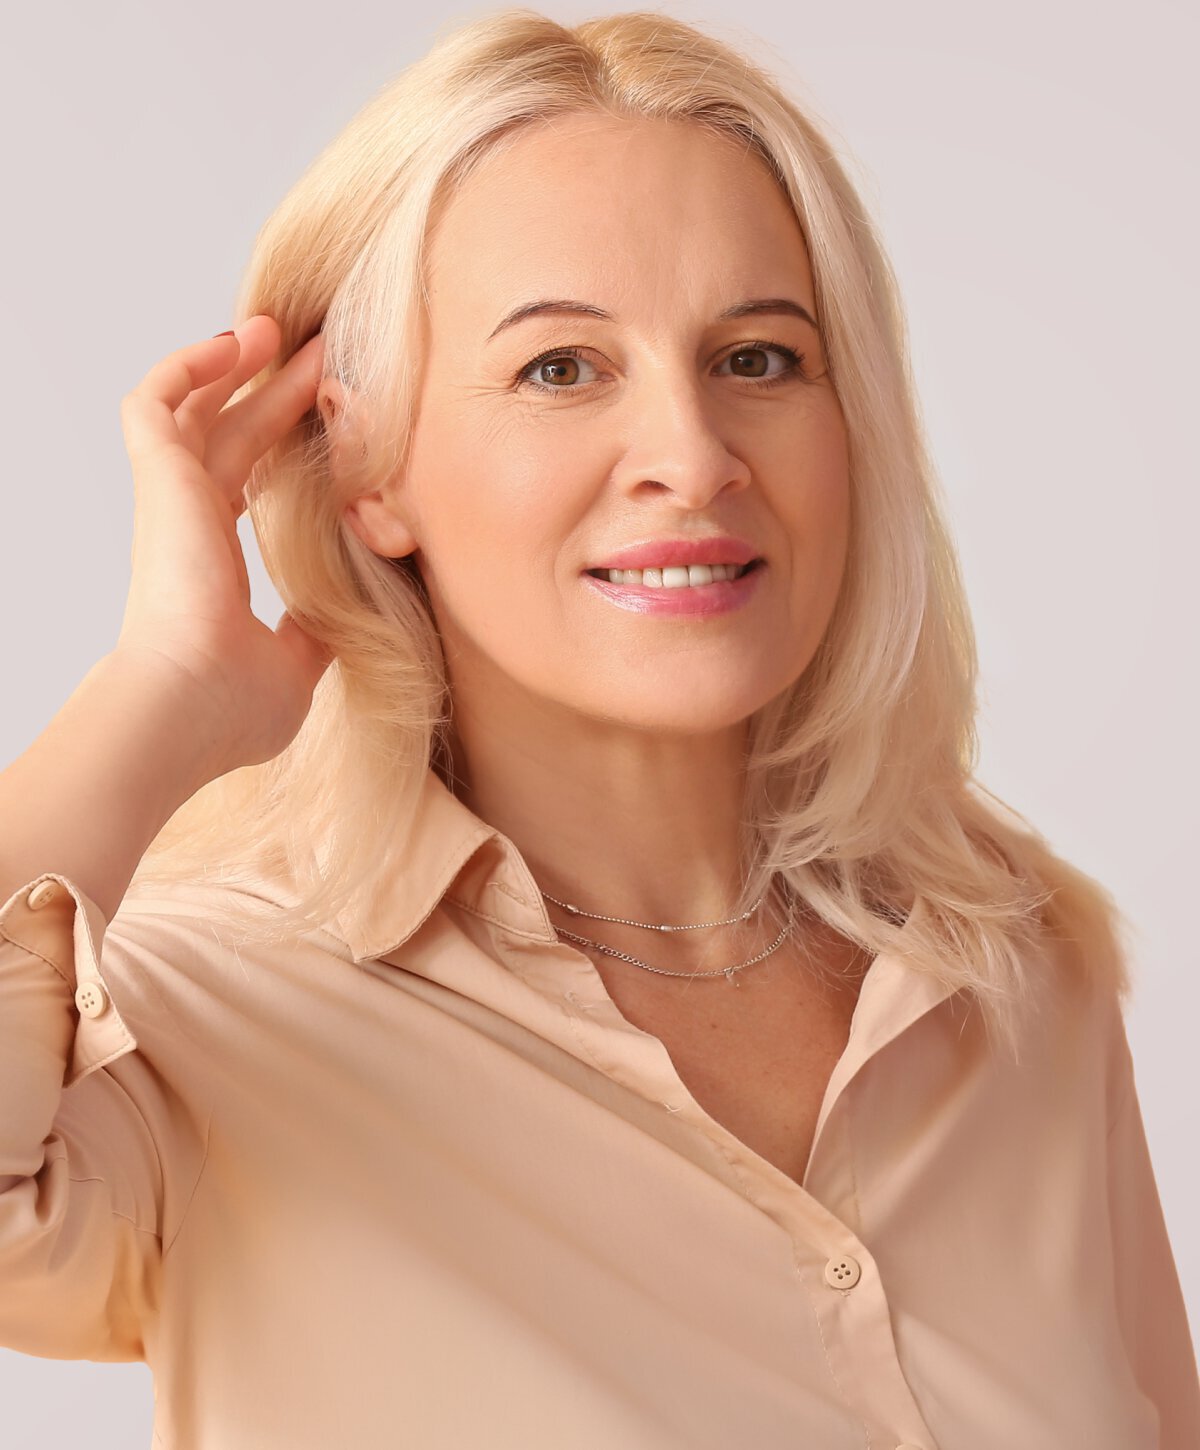 Fairfield County facelift model with blonde hair